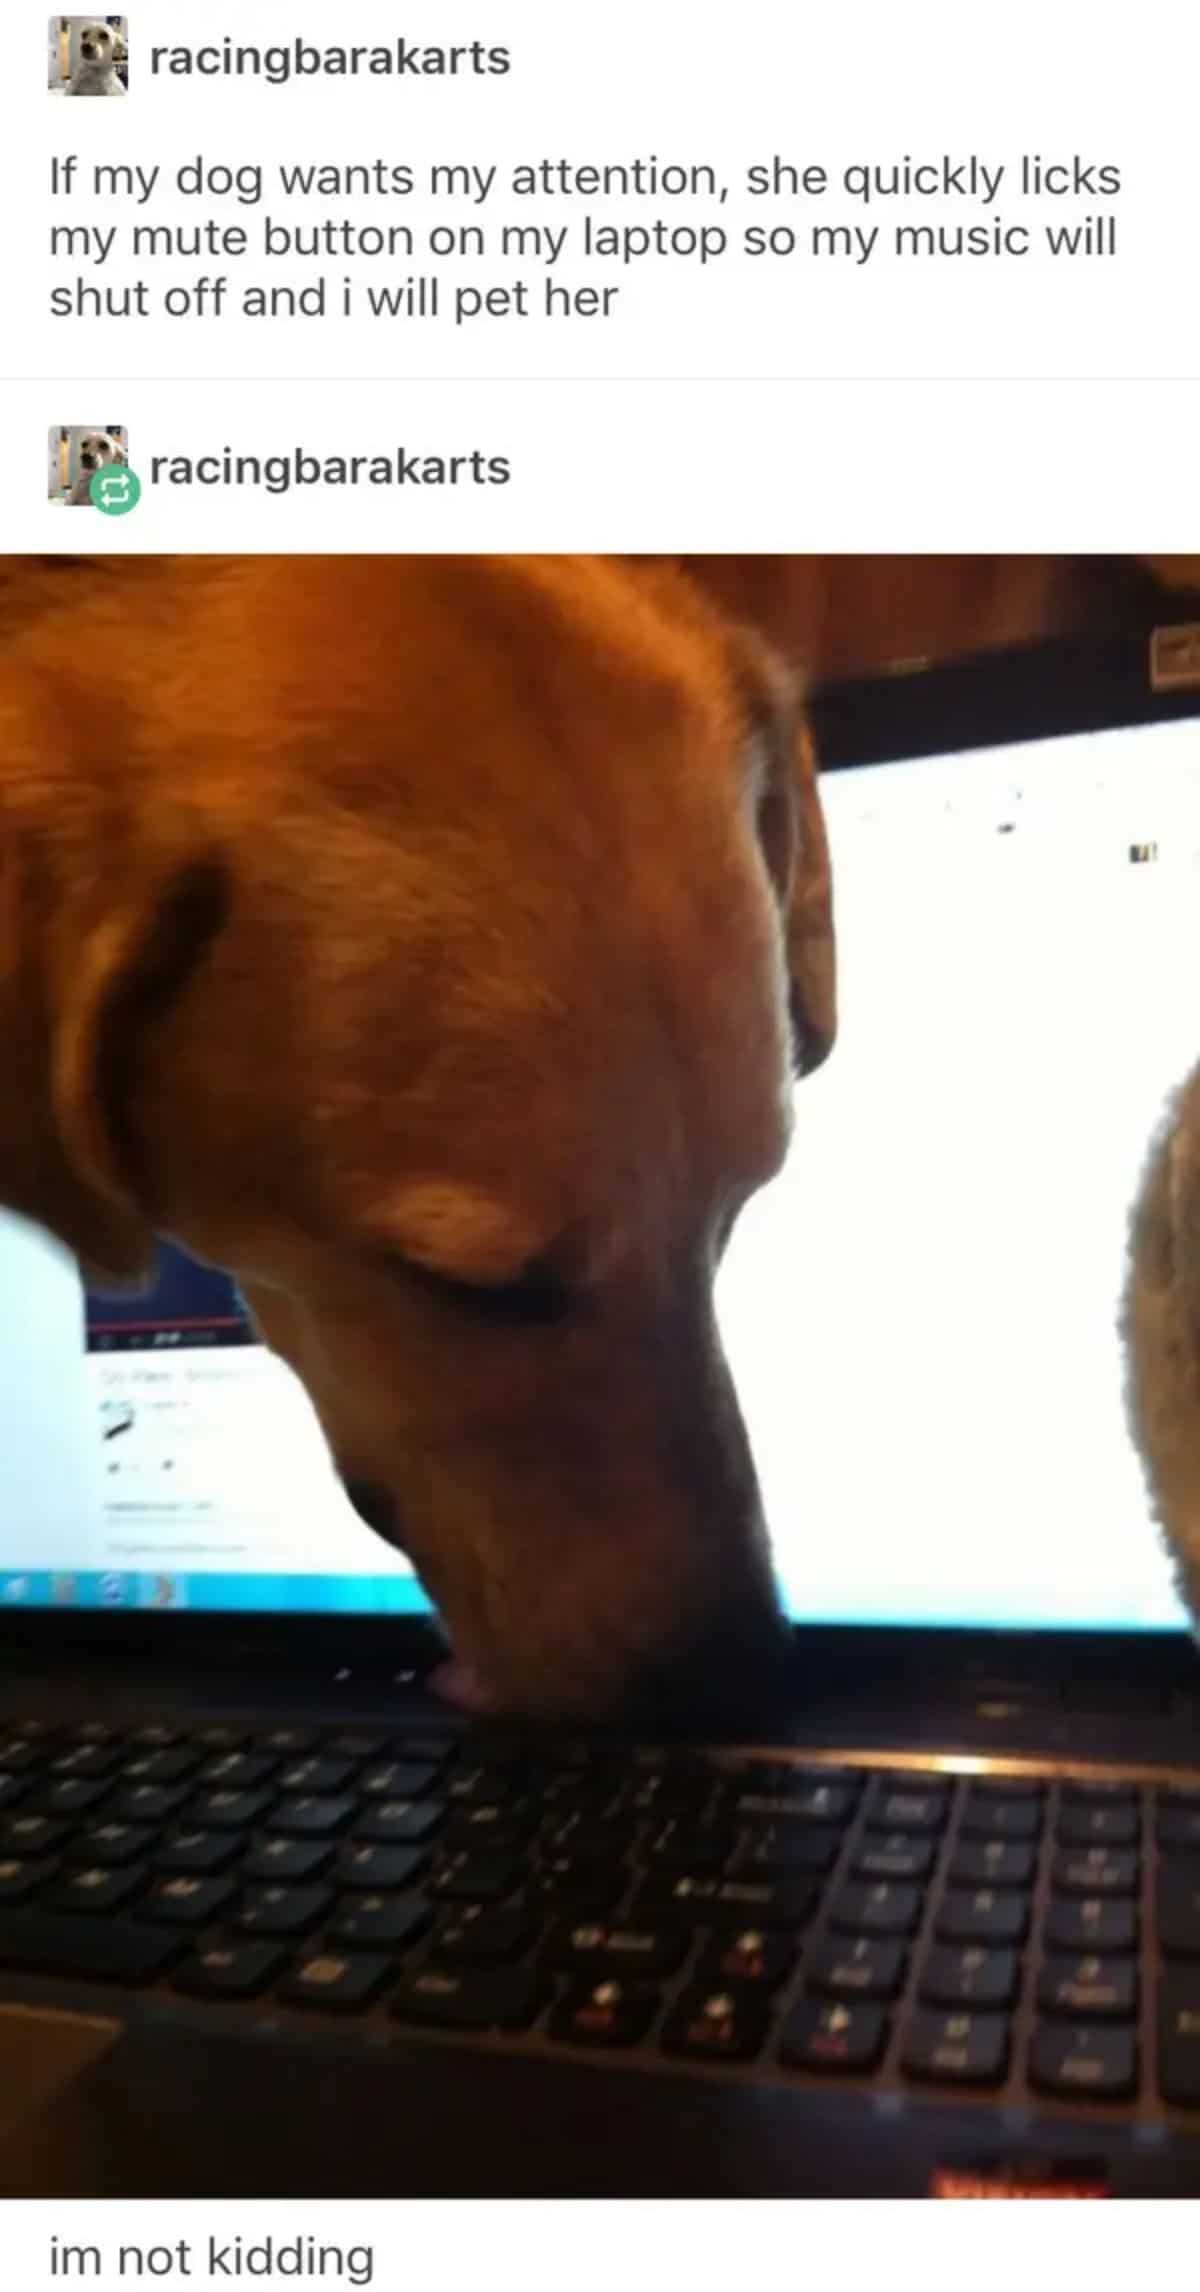 brown dog licking a keyboard with caption saying the dog licks the mute button on keyboard when she wants attention